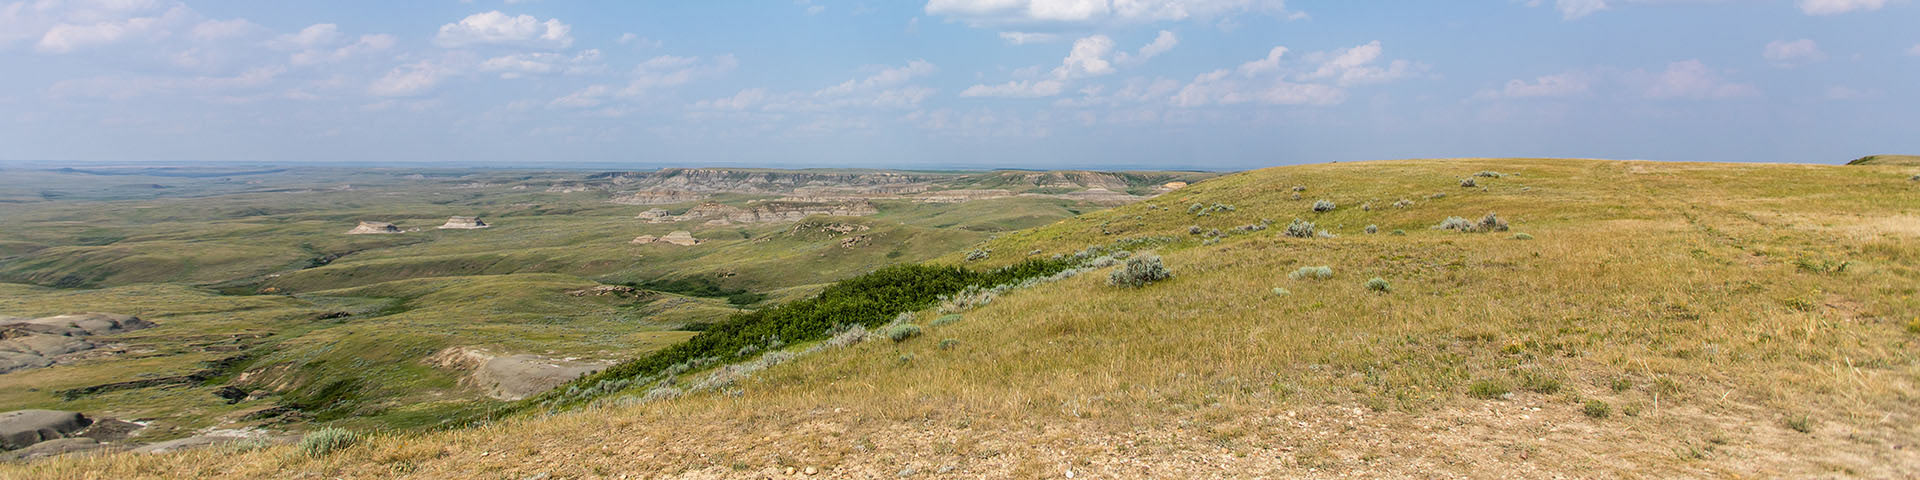 Scenic views from the Badlands Parkway in the East Block.